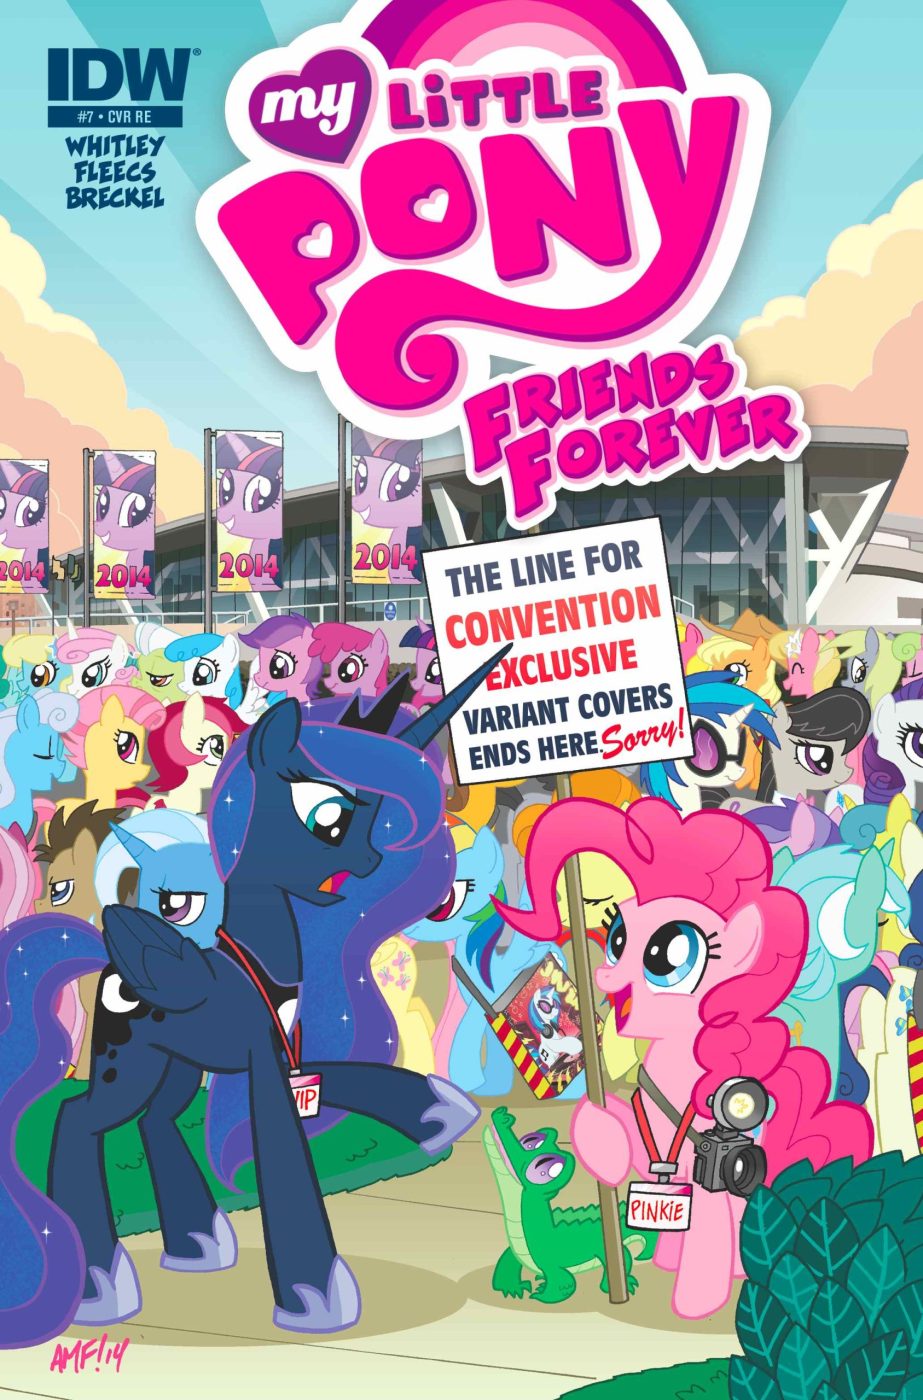 My Little Pony Friends Forever #7 (OFFICIAL BRONY CON EDITION – Limited Edition Color Cover)